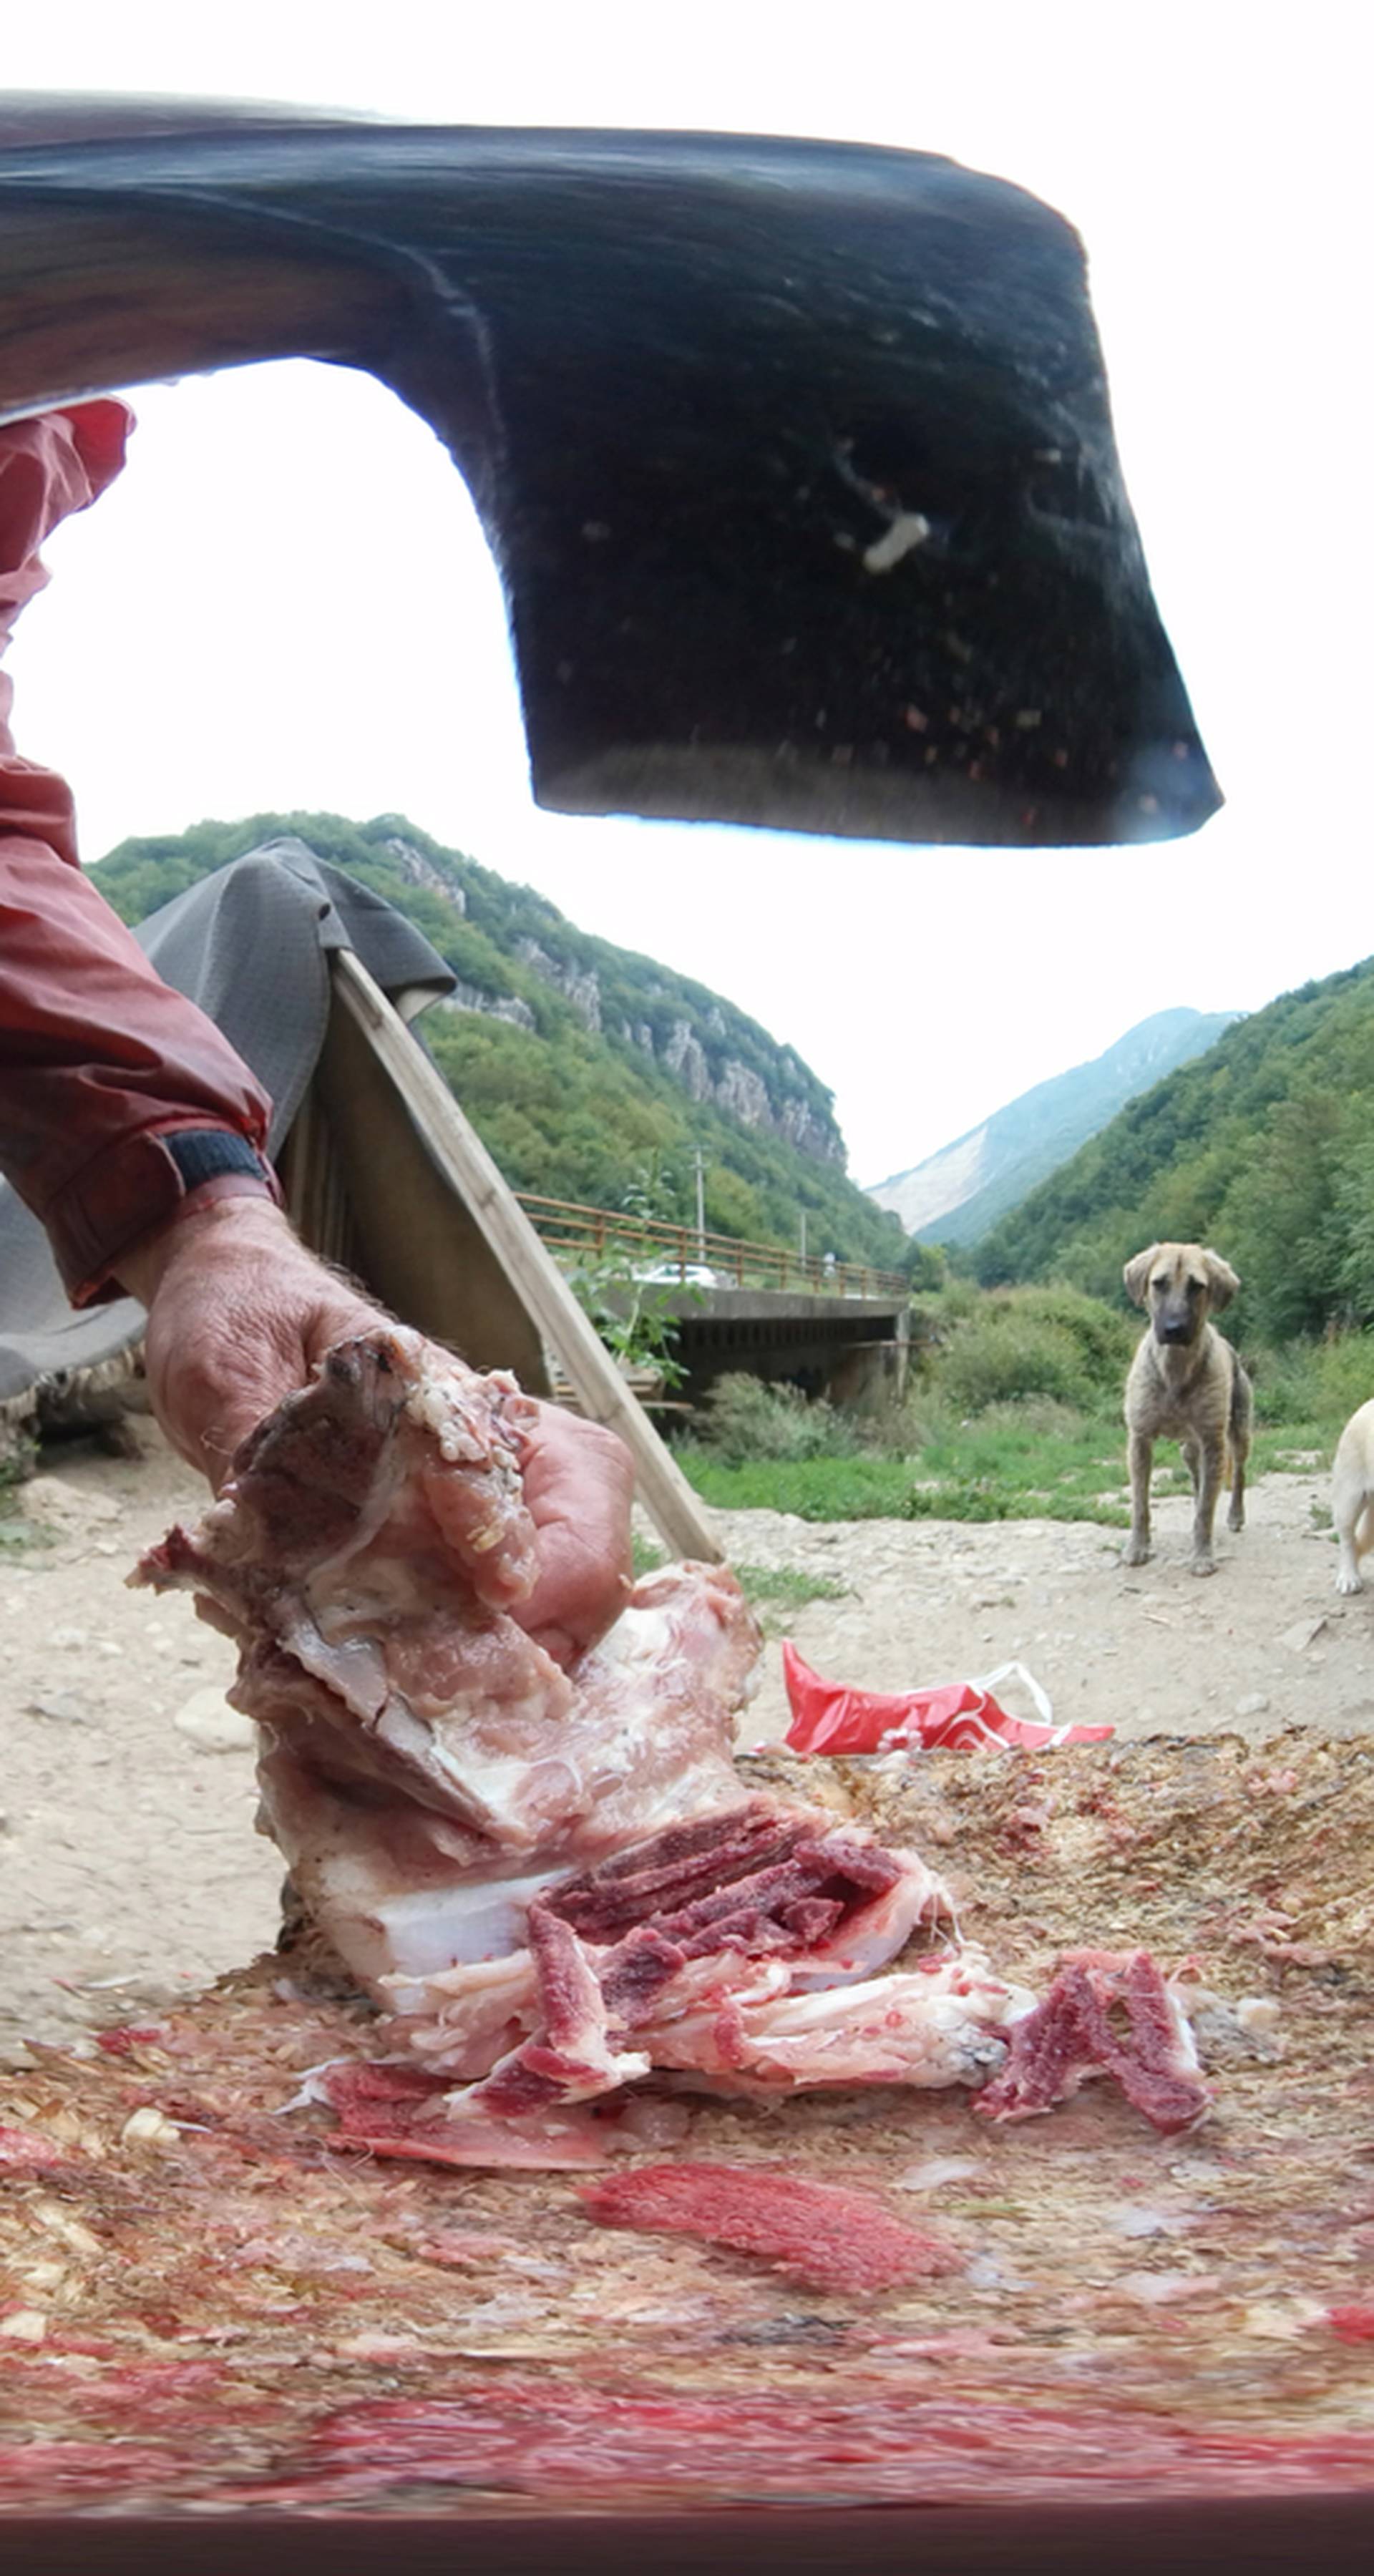 Stray dogs watch former steel factory worker Zarko Hrgic hack away at meat with a hatchet to feed them